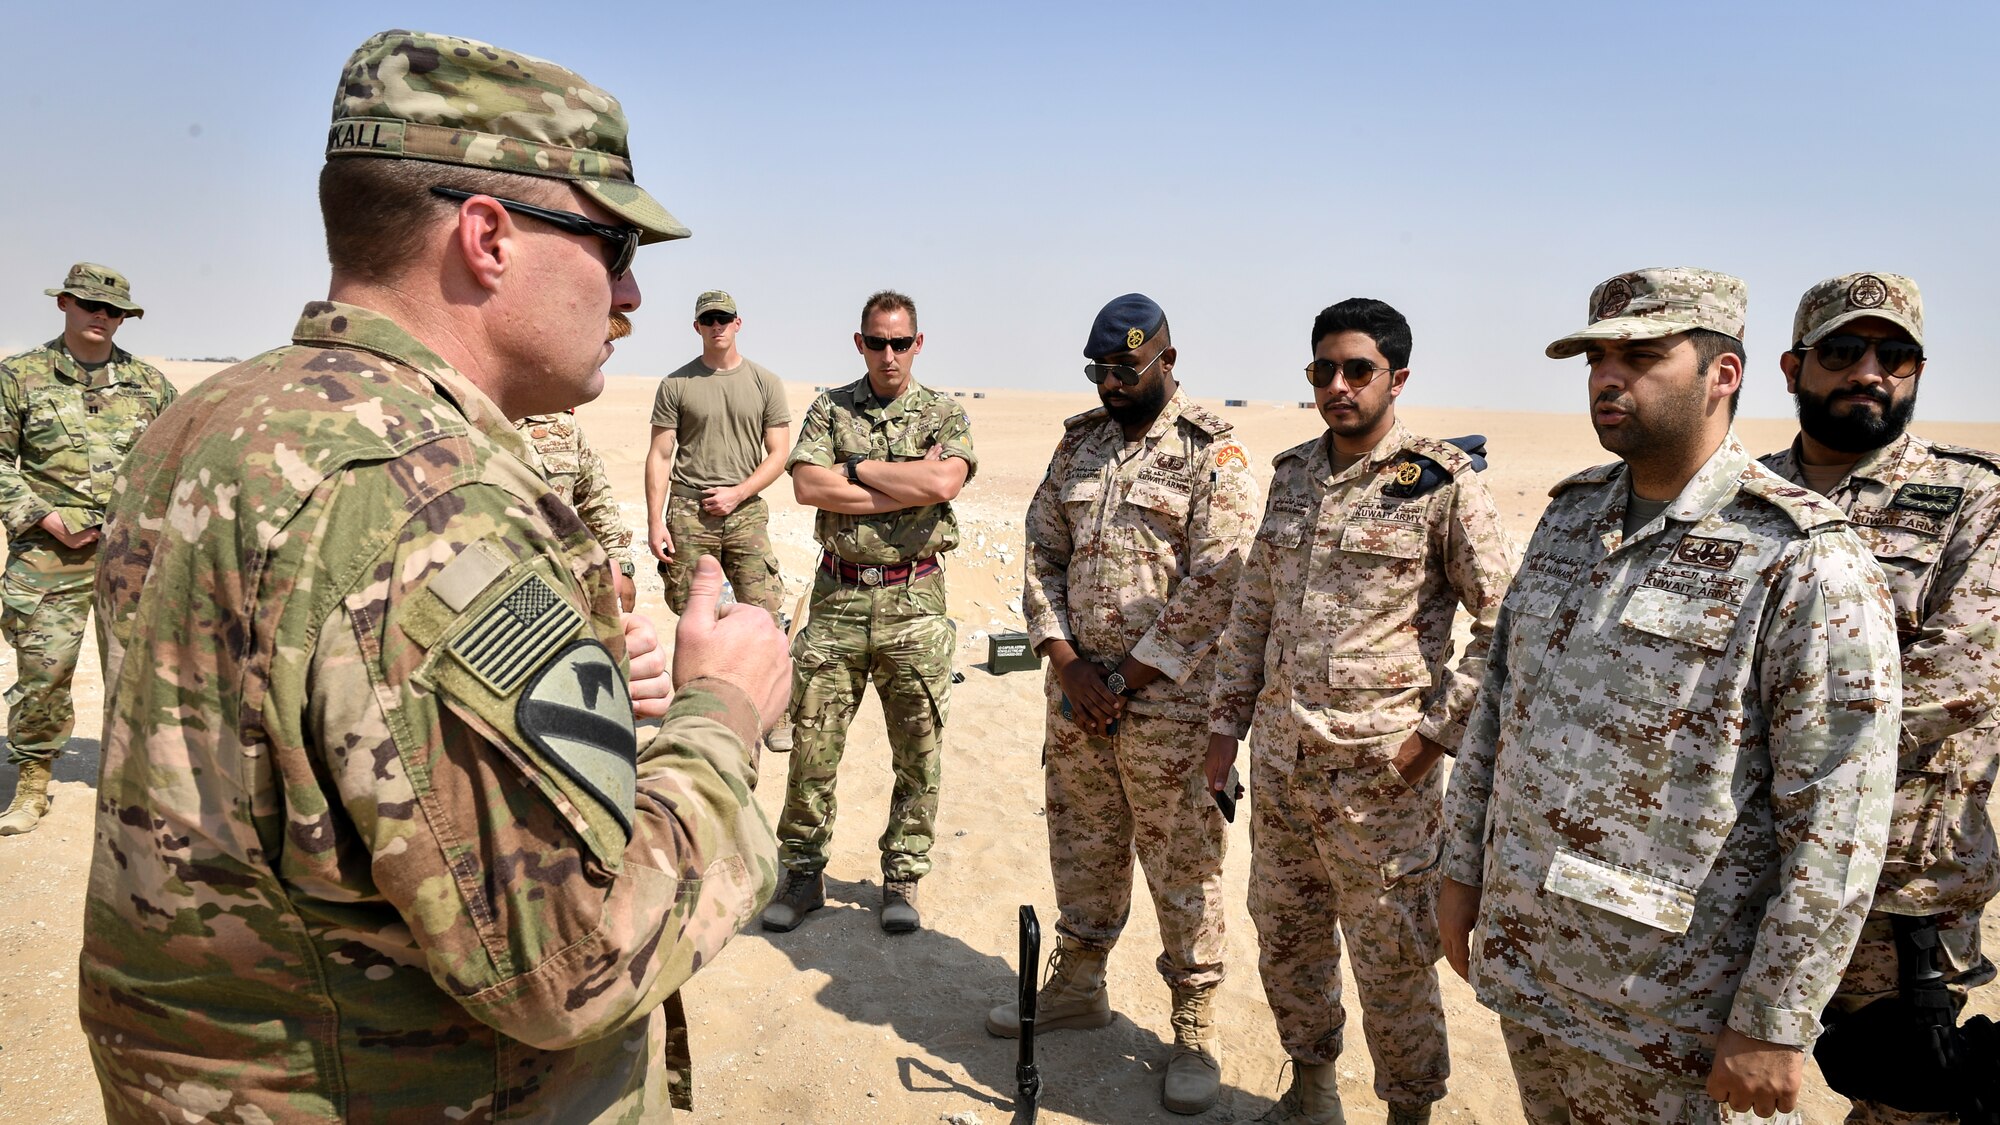 U.S. Army 1st Sgt. Adam Blunkall, 744th Ordnance Company first sergeant, speaks with Kuwaiti Ministry of Defense EOD technicians before an insensitive munitions disposal training at the Udari Range, Kuwait, Sept. 30, 2019. The training was designed for U.S. and Kuwaiti forces to share techniques, synchronize capabilities and build partnerships.